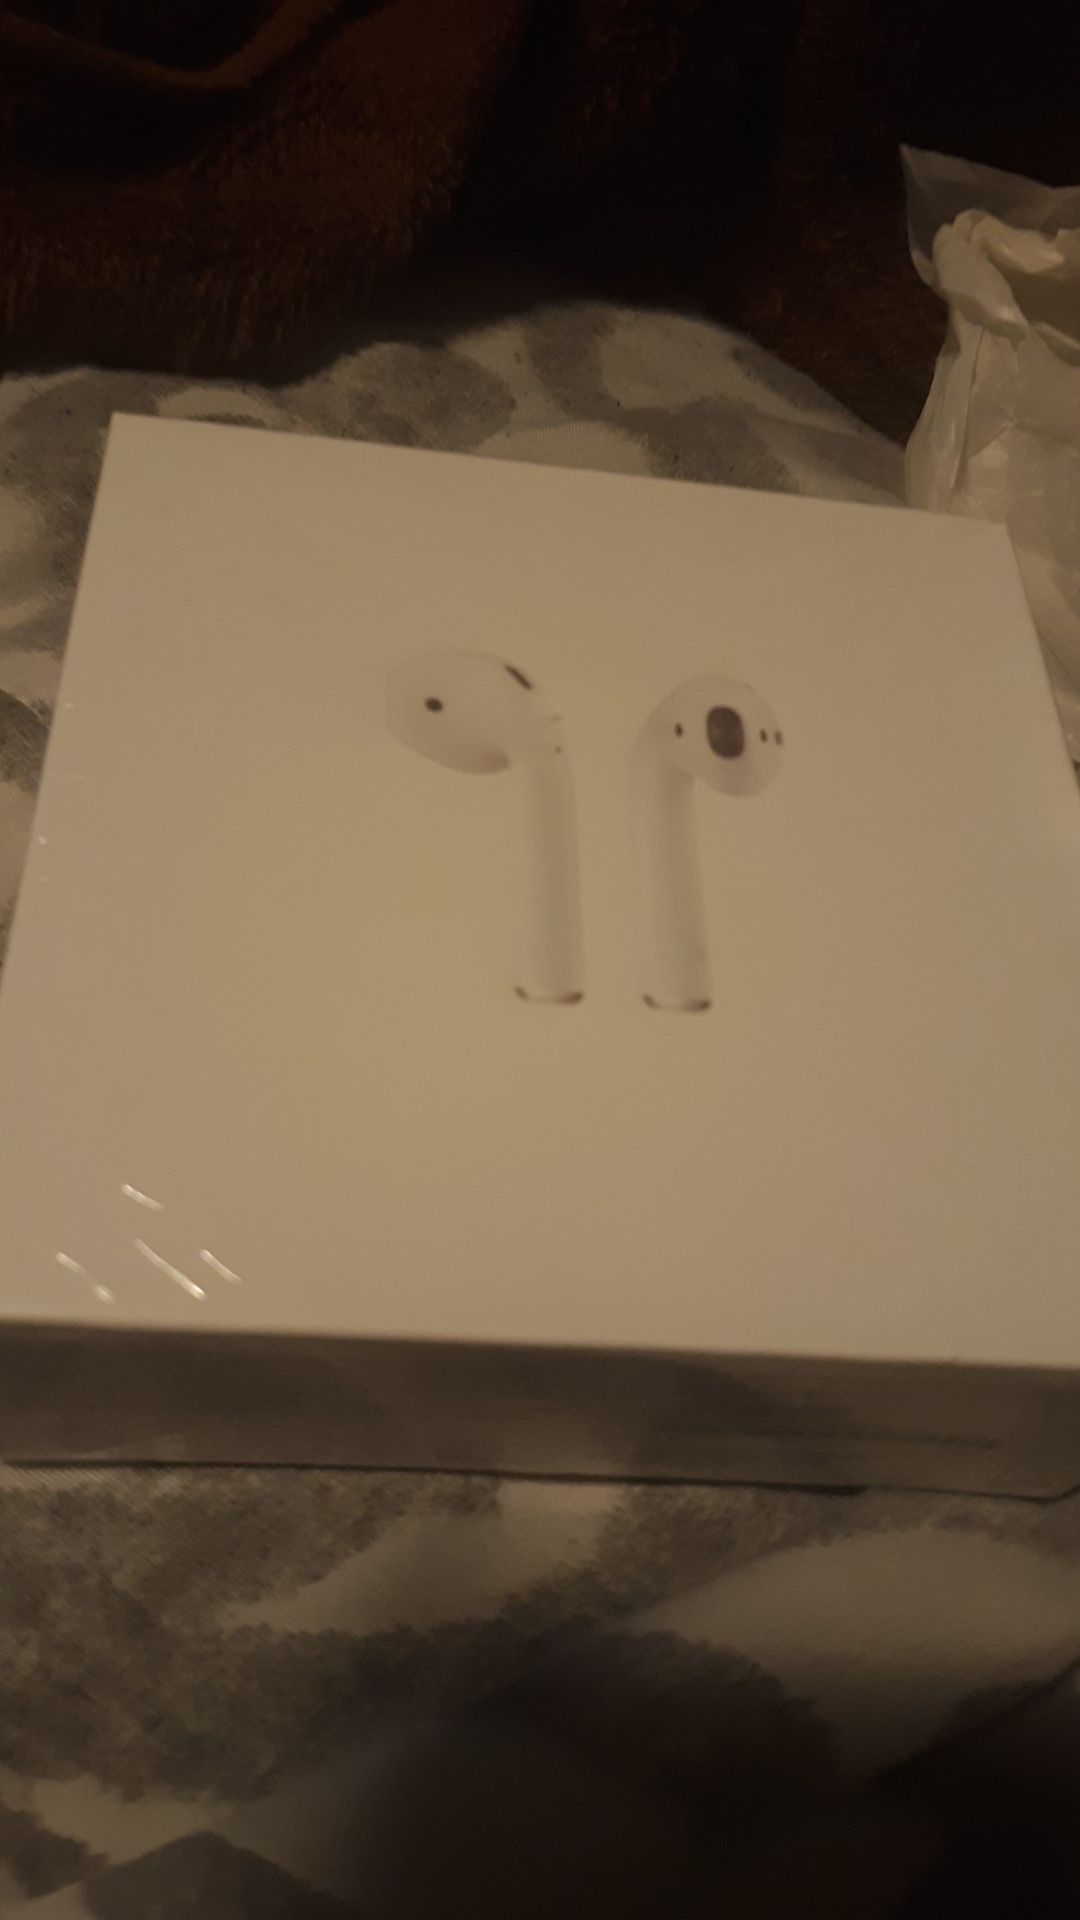 Air pods 2 brand new never opened, still wraped in box